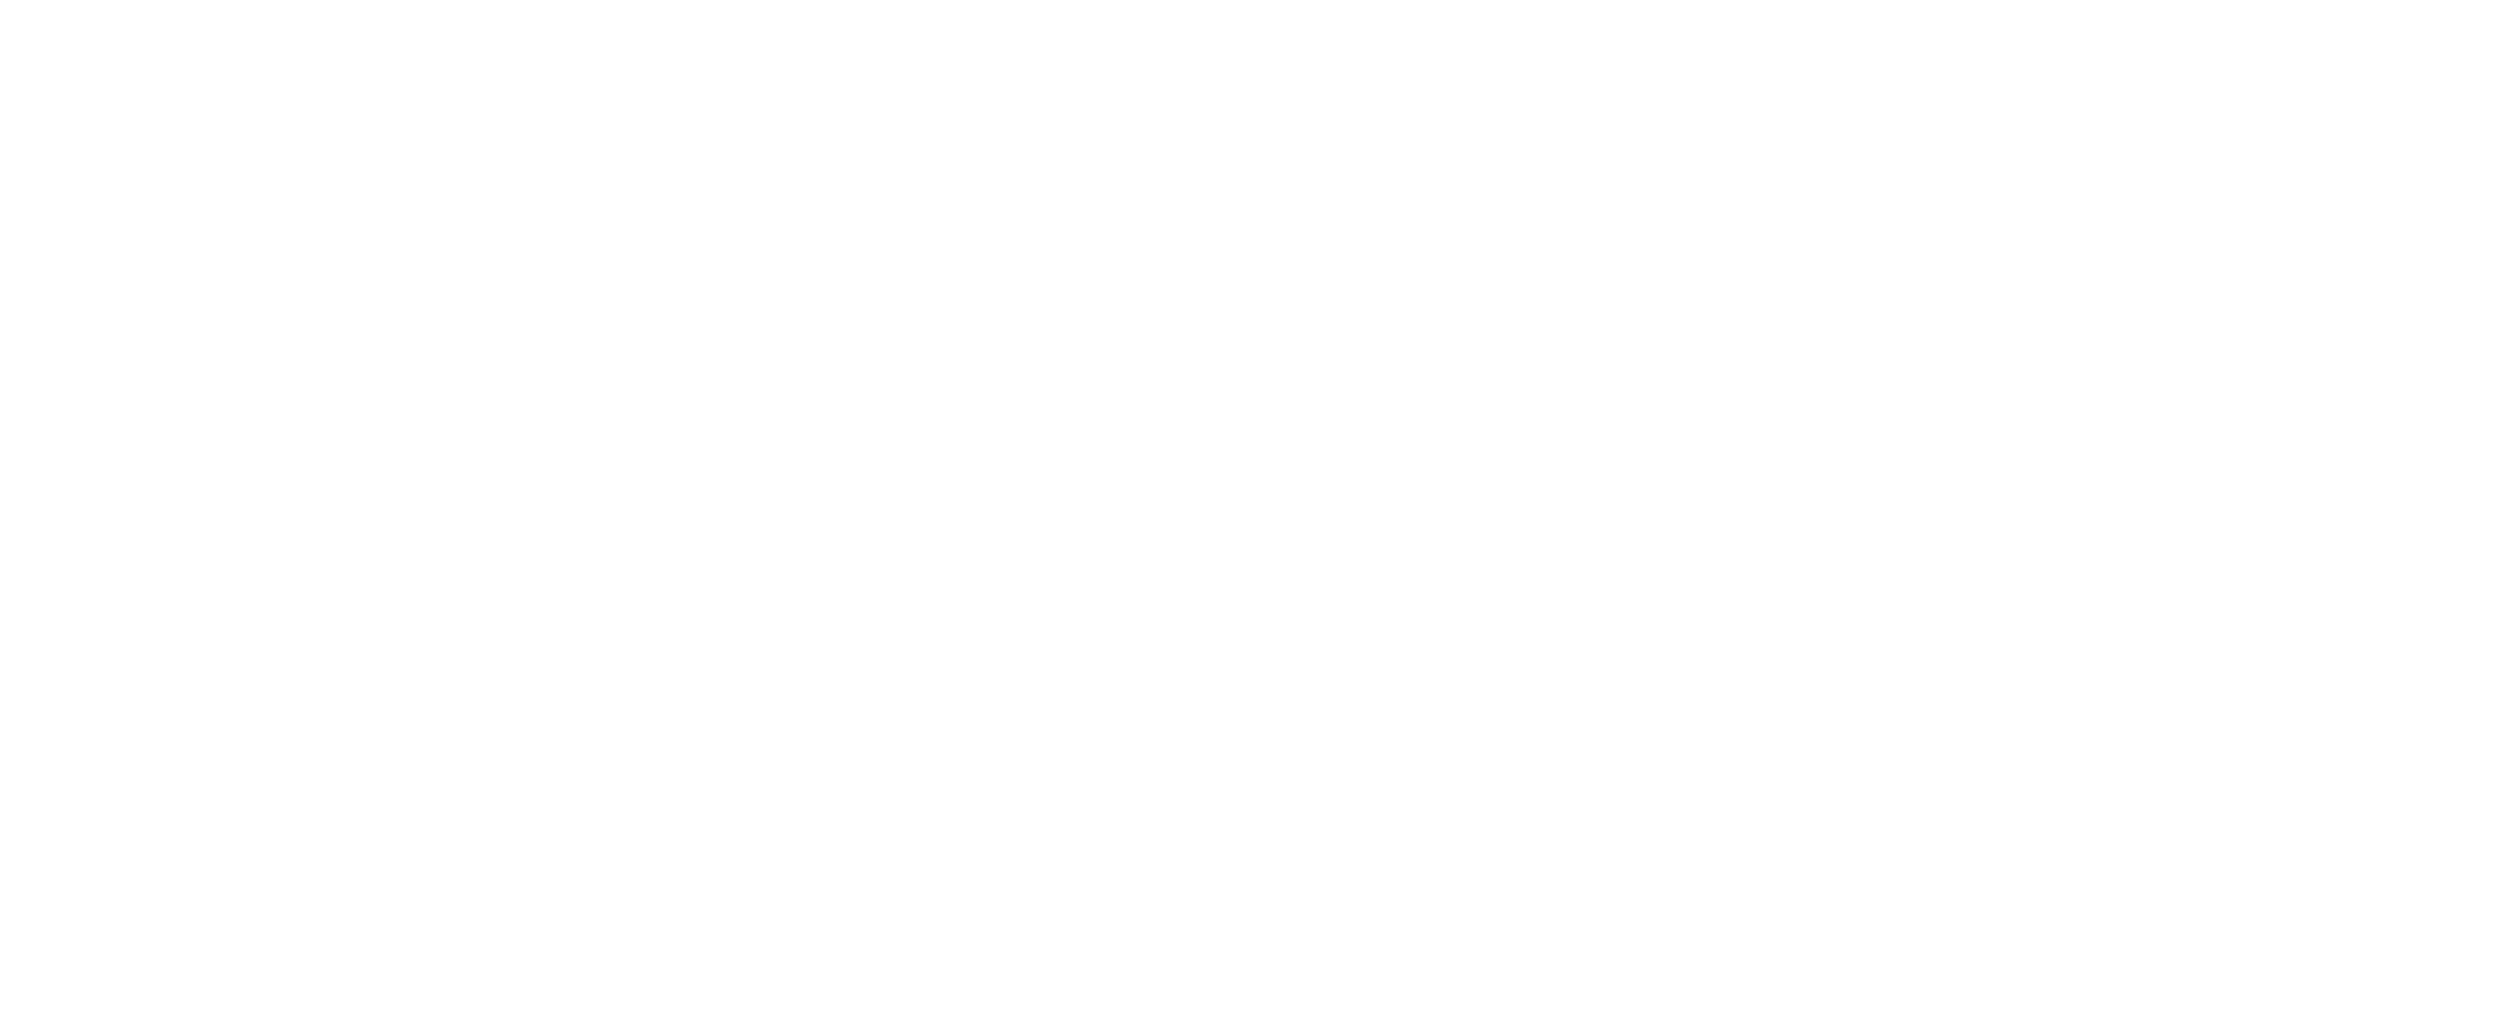 Small Business Strategy, Planning &amp; Consulting, Tampa, FL &mdash; Victoria Skinner Consulting